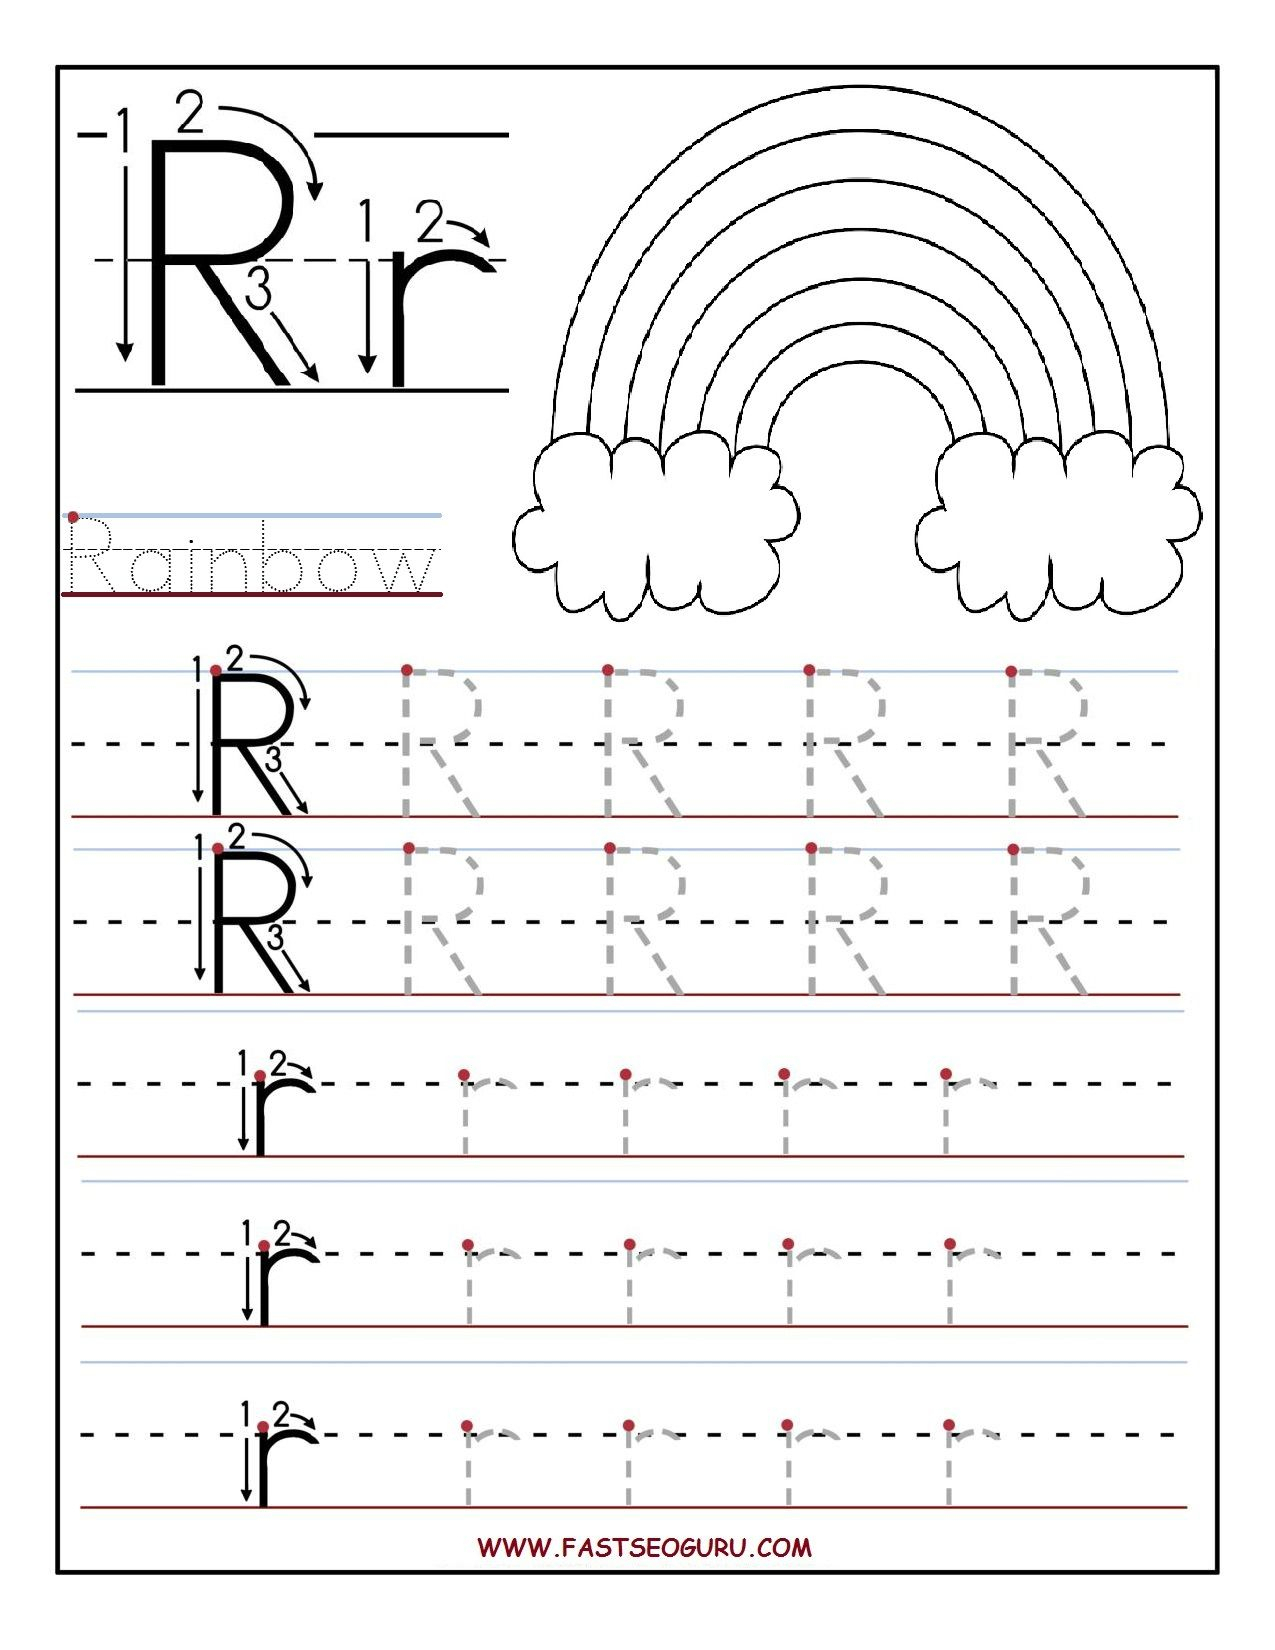 Printable Letter R Tracing Worksheets For Preschool | Letter pertaining to Letter R Worksheets Free